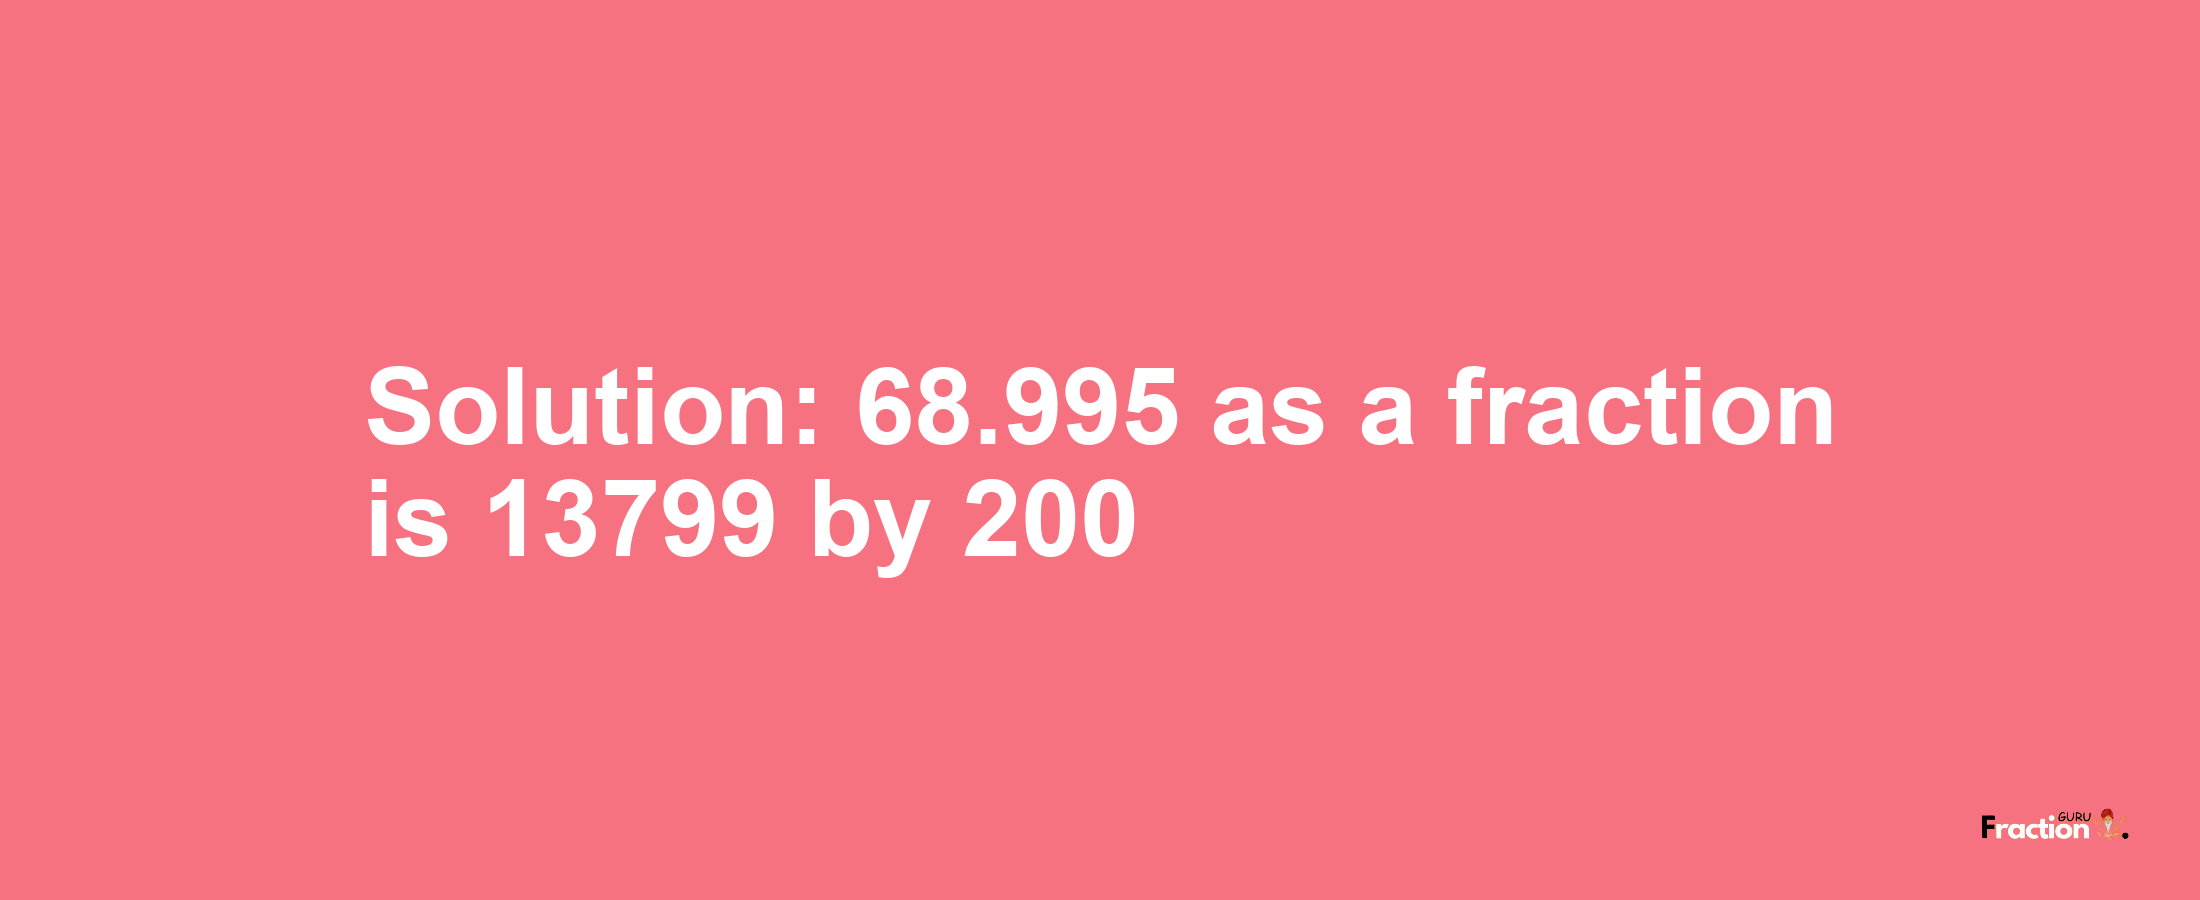 Solution:68.995 as a fraction is 13799/200